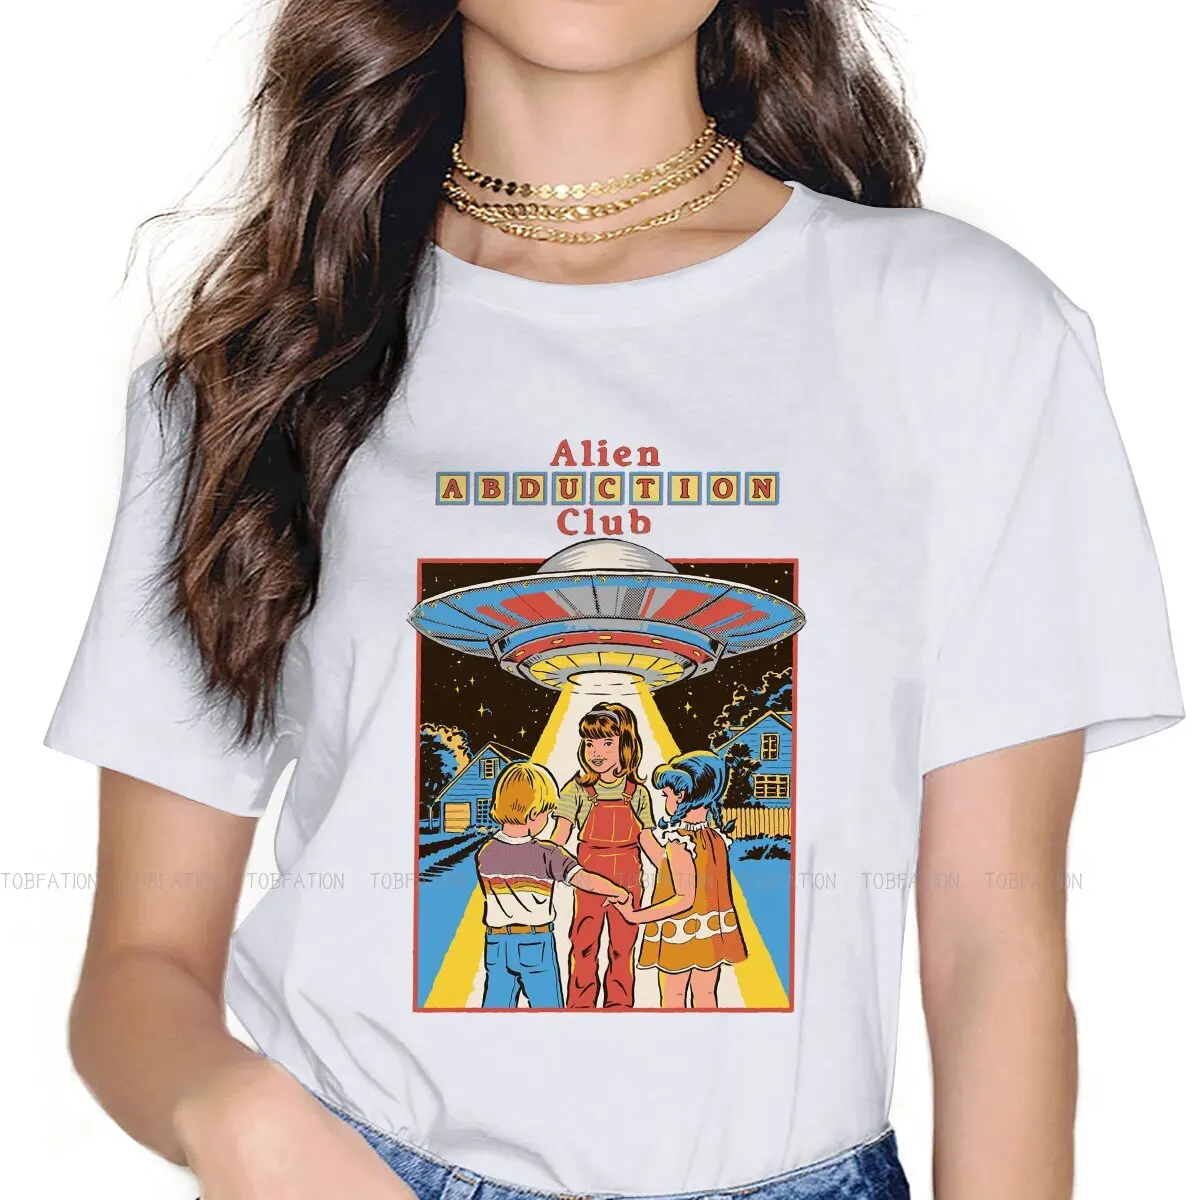 Alien Abduction Club Women Clothing Manga Graphic Vintage Classic Graphic Female Tshirts Vintage Graphic Loose Tops Tee Kawaii